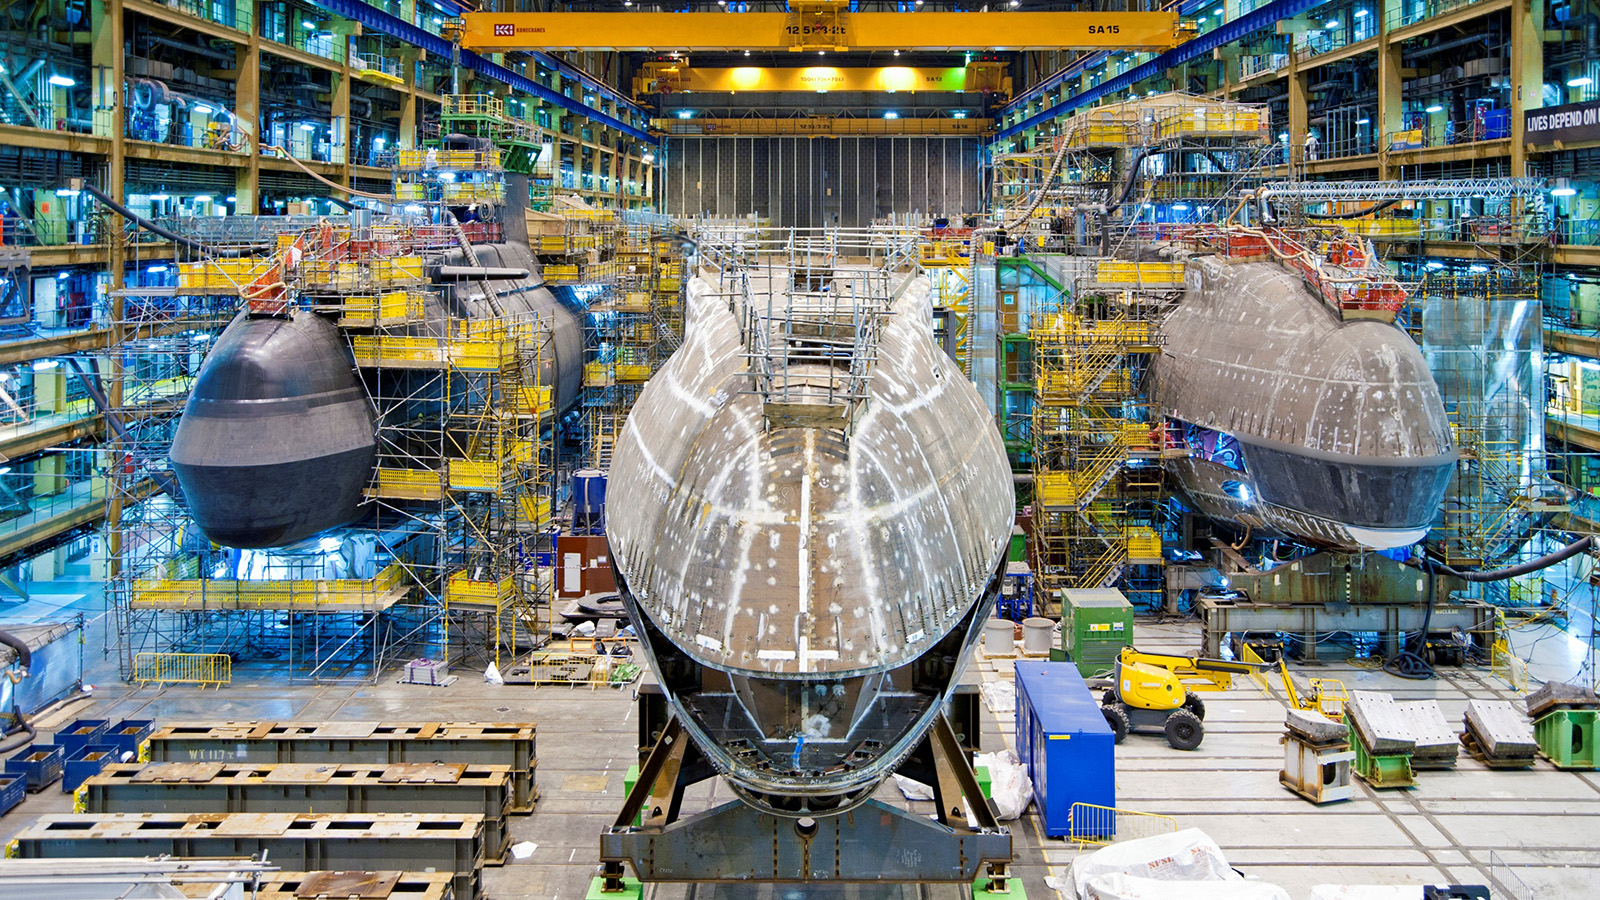 This Towering Egg Is The Nose Of UK’s Next Nuclear Submarine